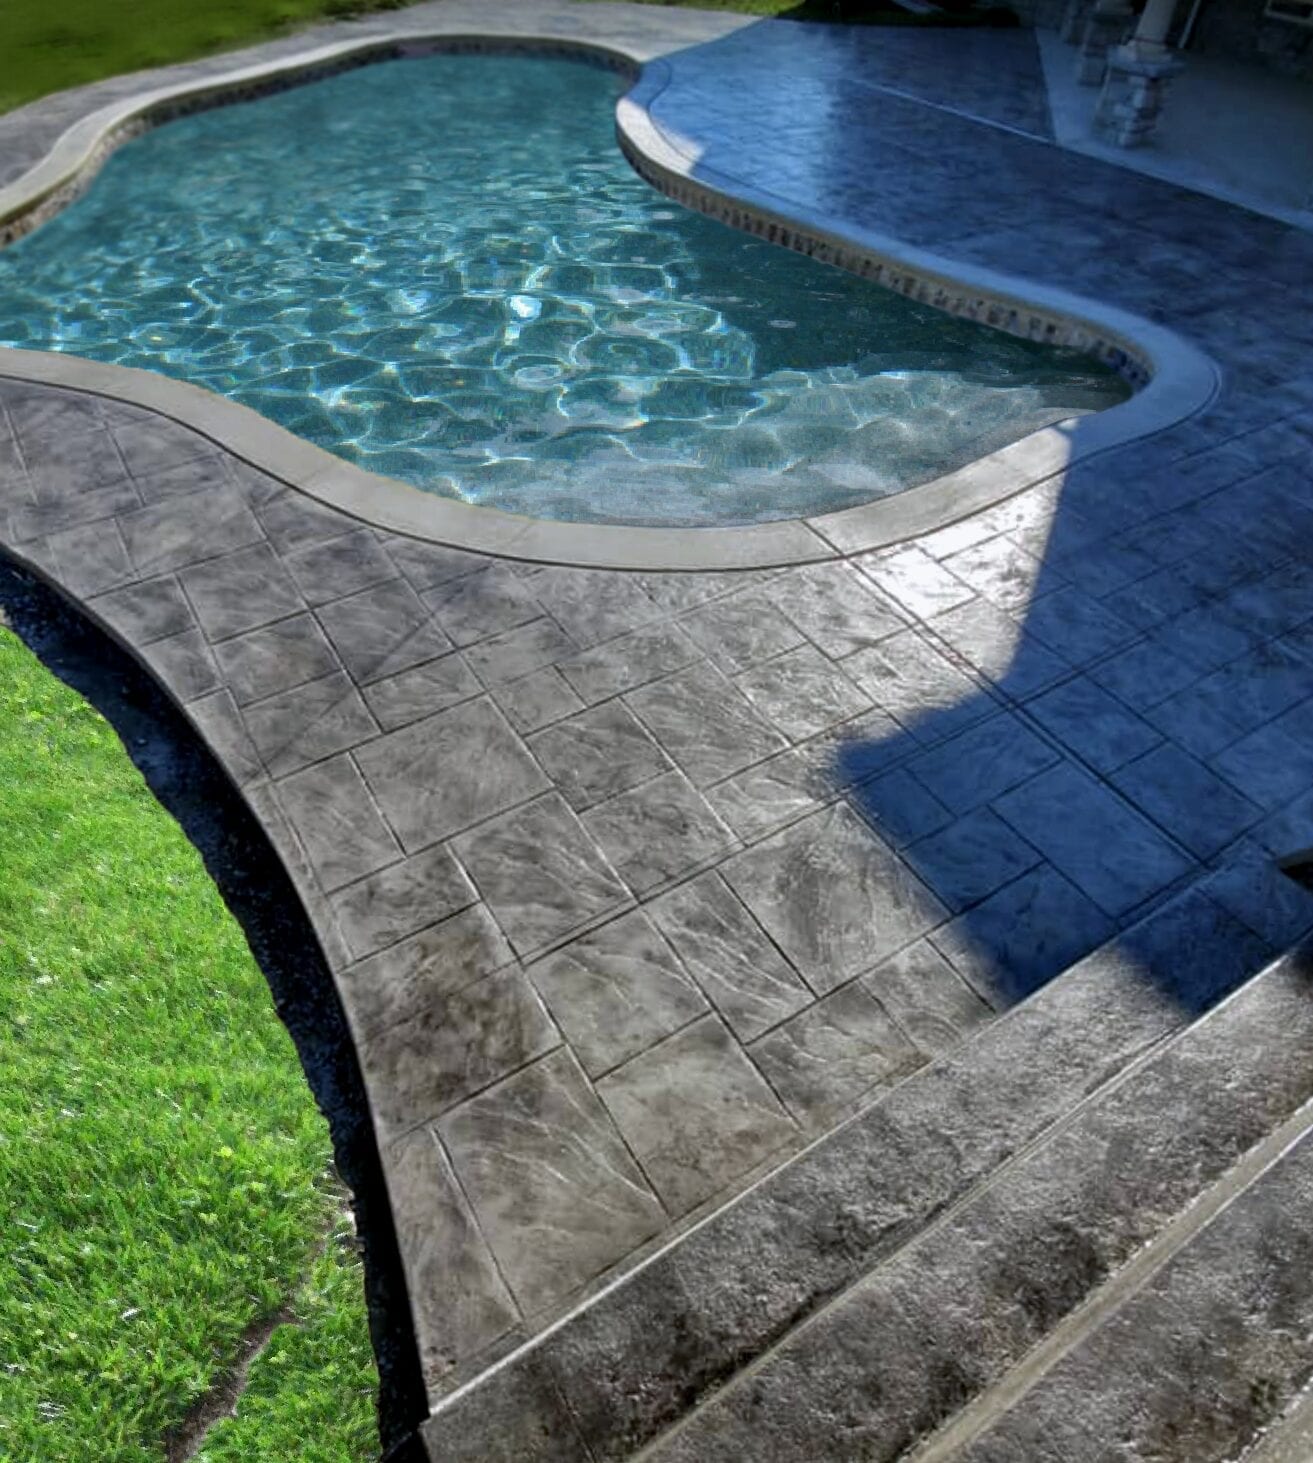 Make a statement with a black stained and sealed stamped concrete pool deck that's both beautiful and durable, providing a slip-resistant surface for all your summer pool activities.